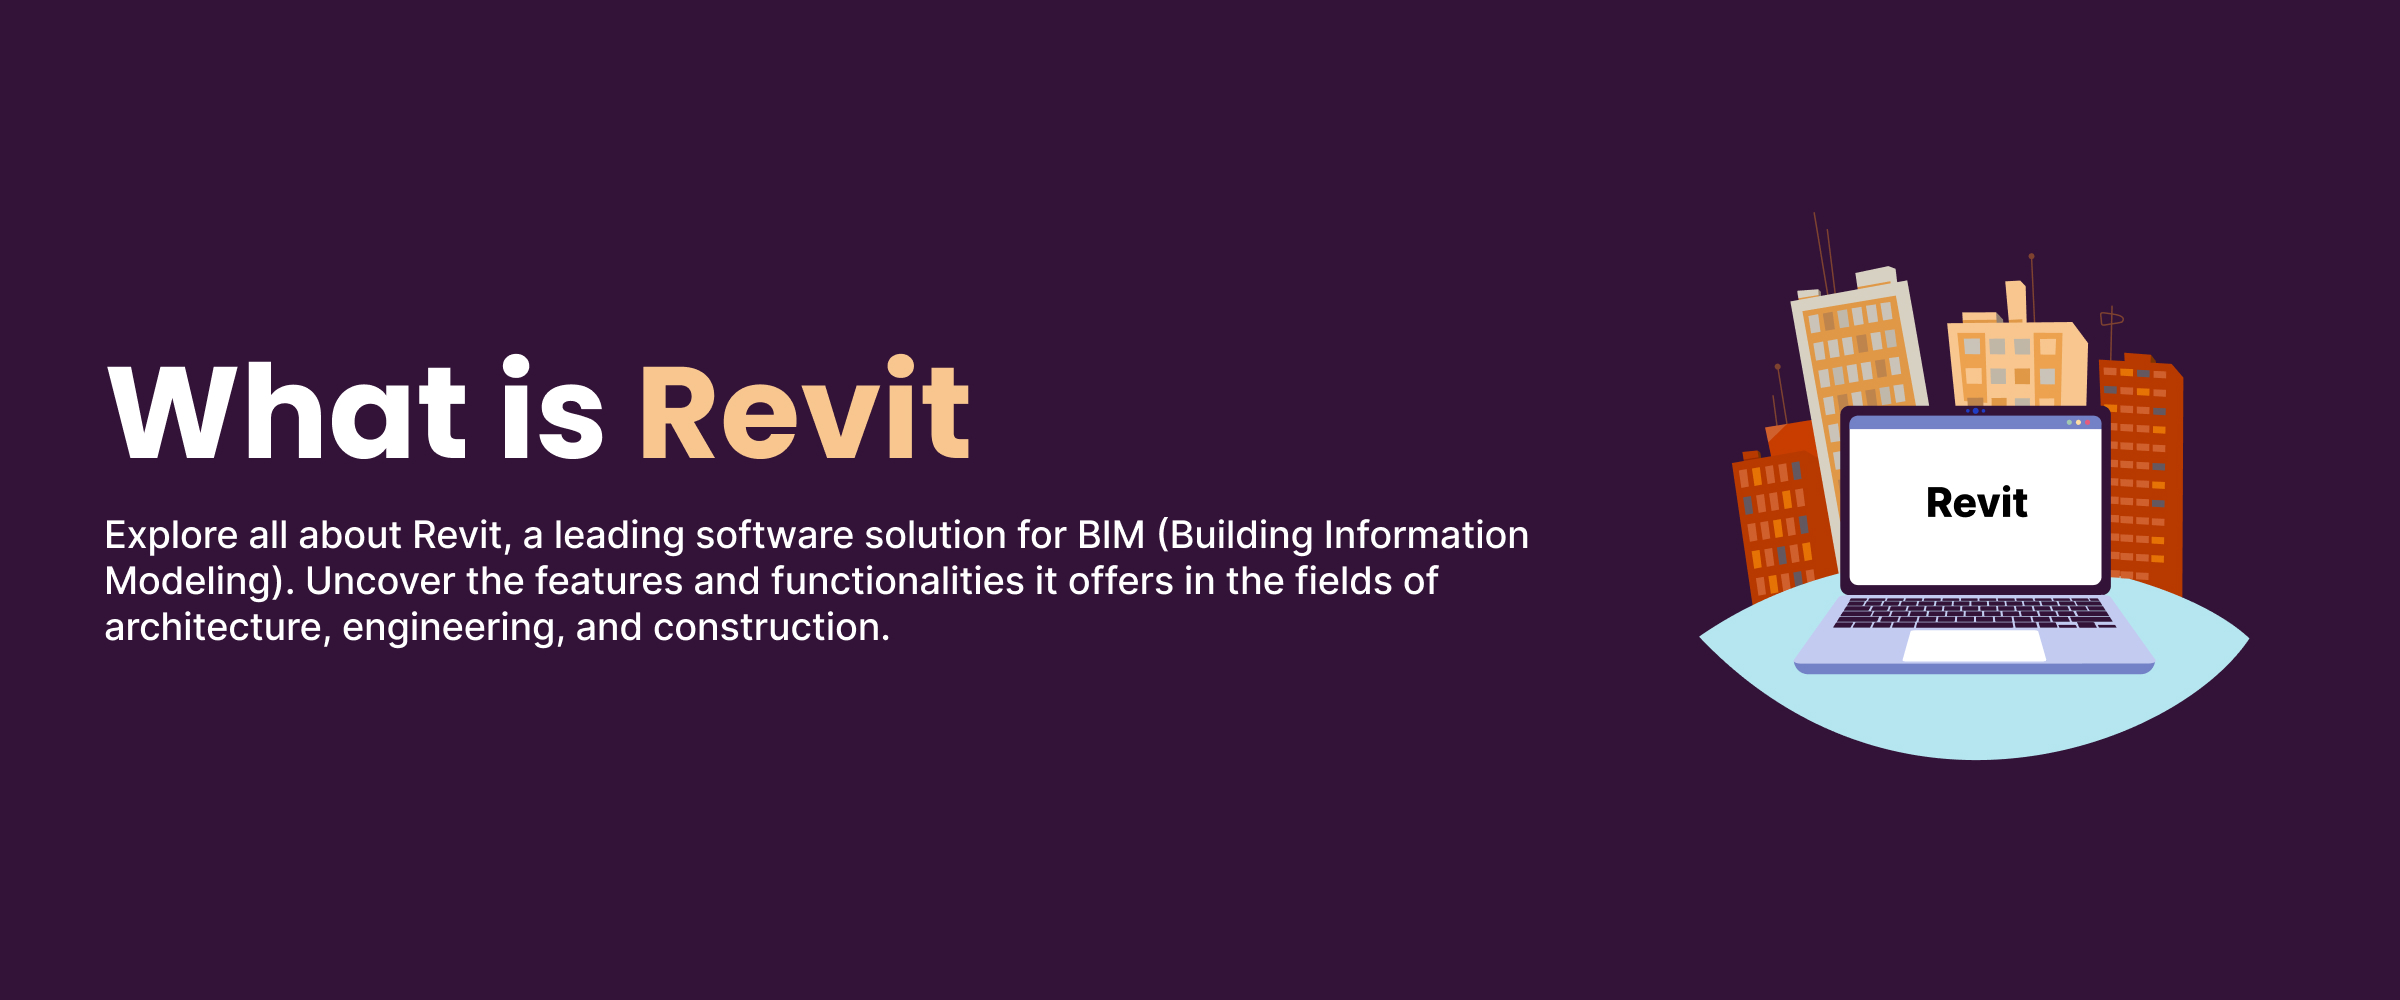 what is revit software